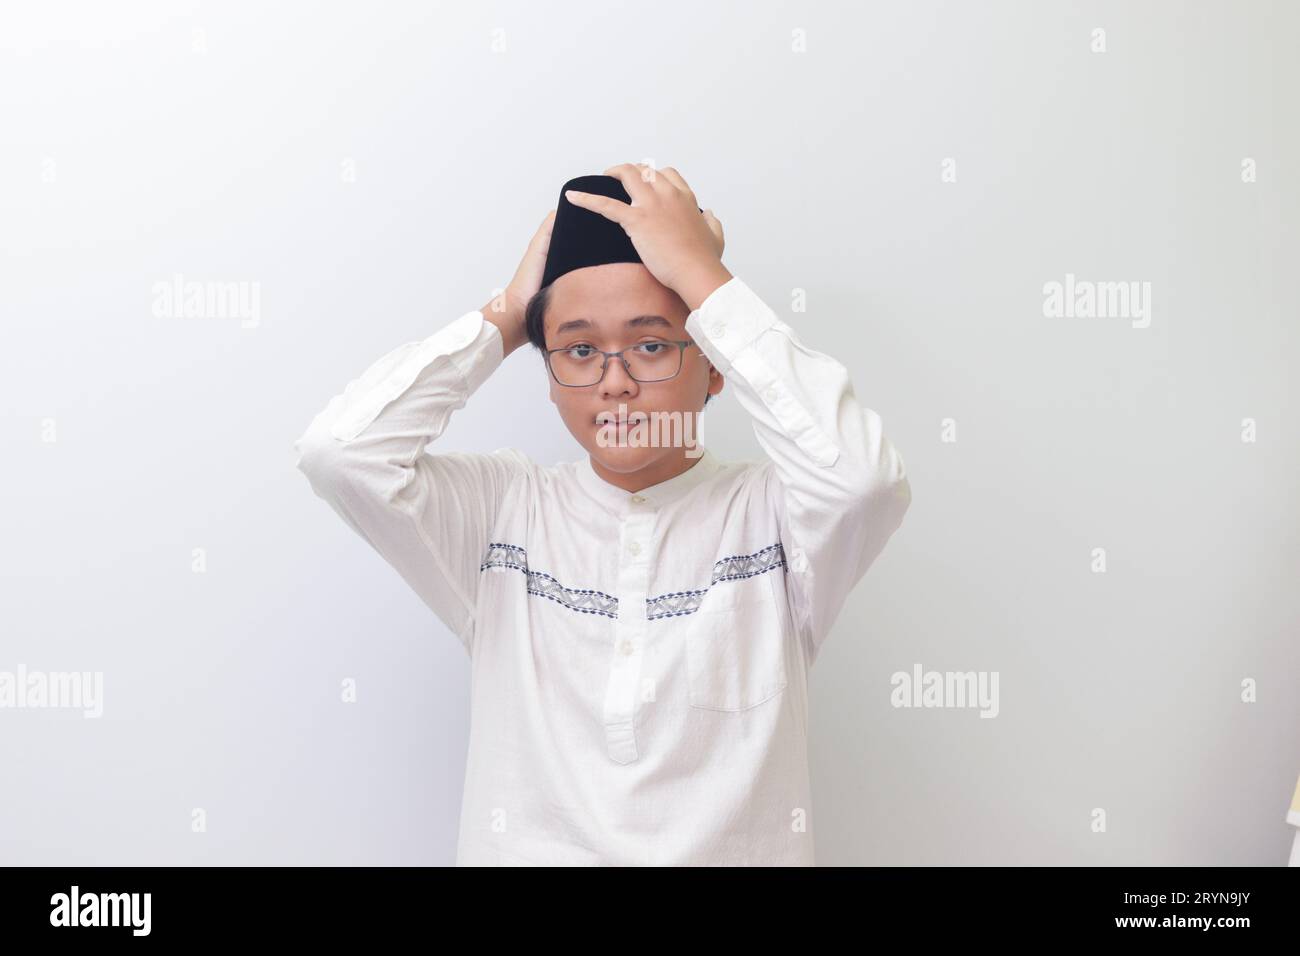 Portrait of young Asian muslim man trying to adjust his songkok or black skullcap. Isolated image on white background Stock Photo